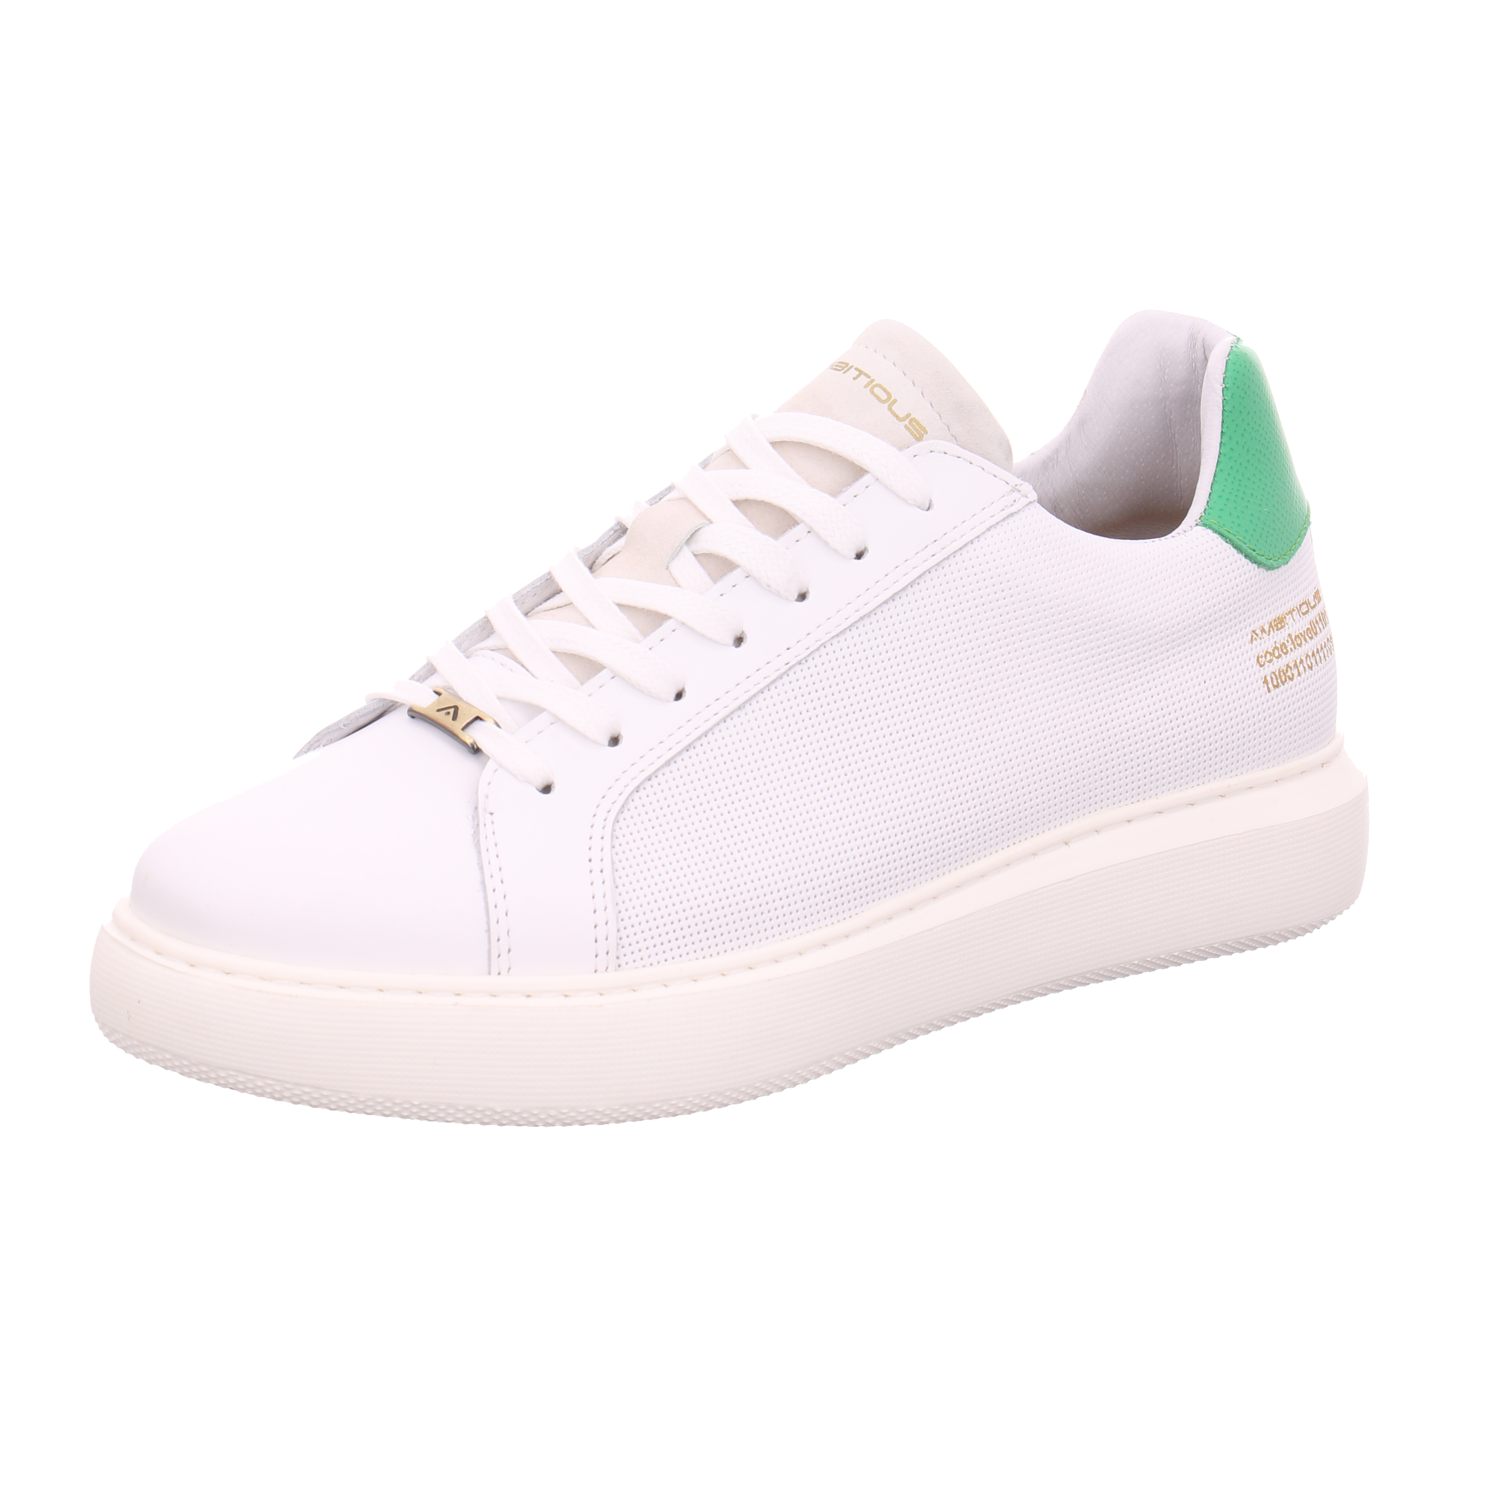 Ambitious-Shoes 10634a white green